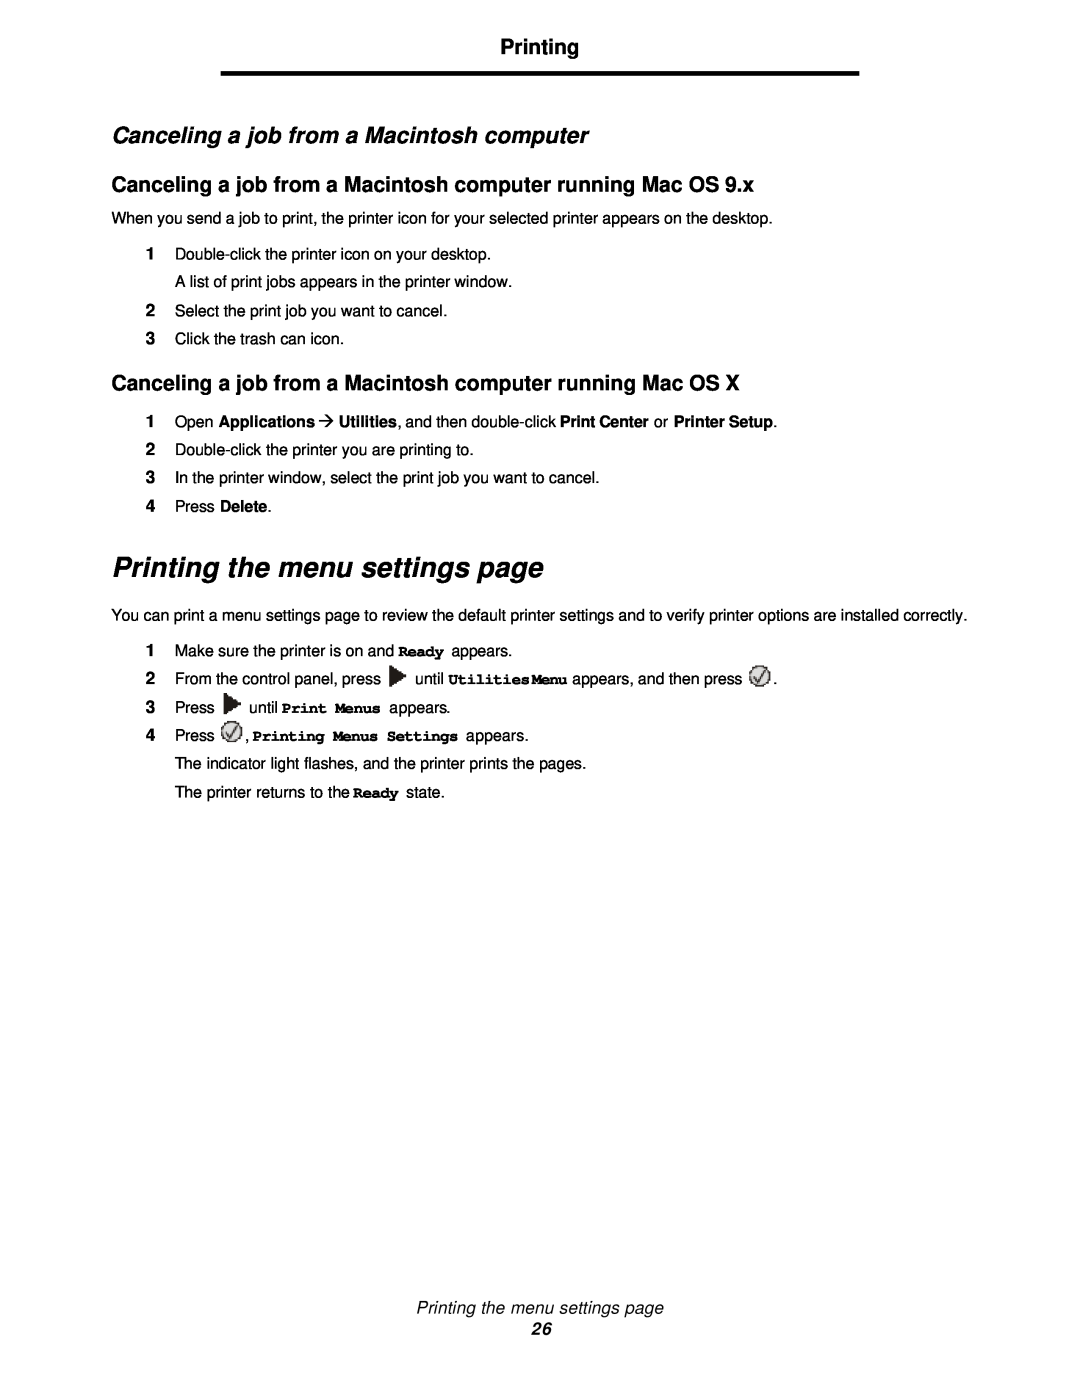 Lexmark 350d manual Printing the menu settings page, Canceling a job from a Macintosh computer 